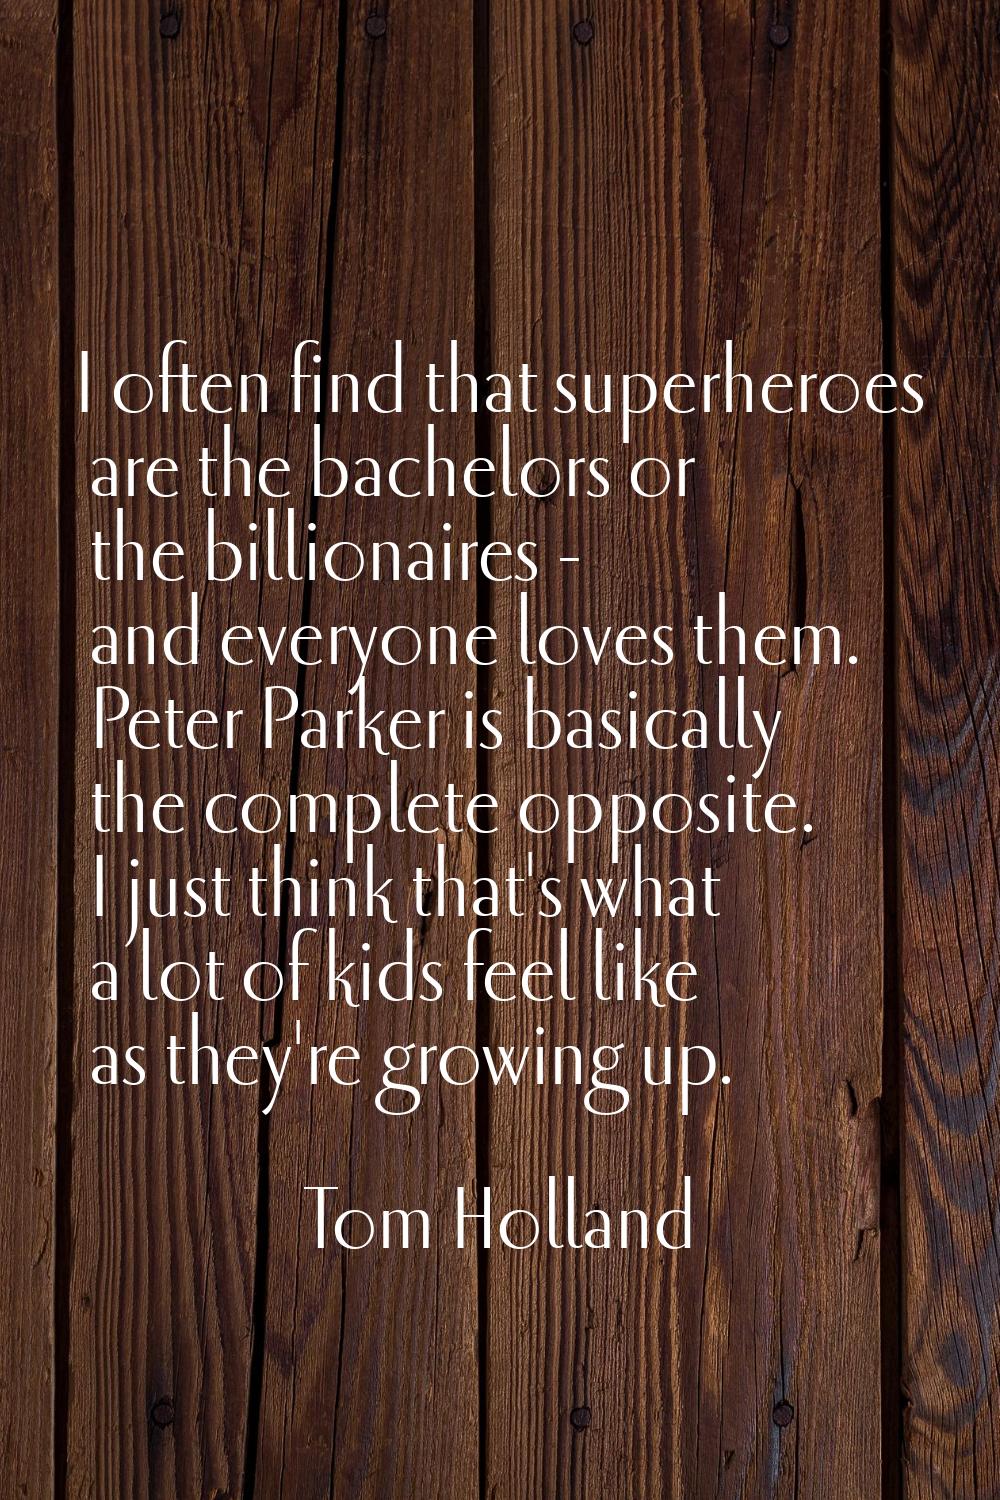 I often find that superheroes are the bachelors or the billionaires - and everyone loves them. Pete